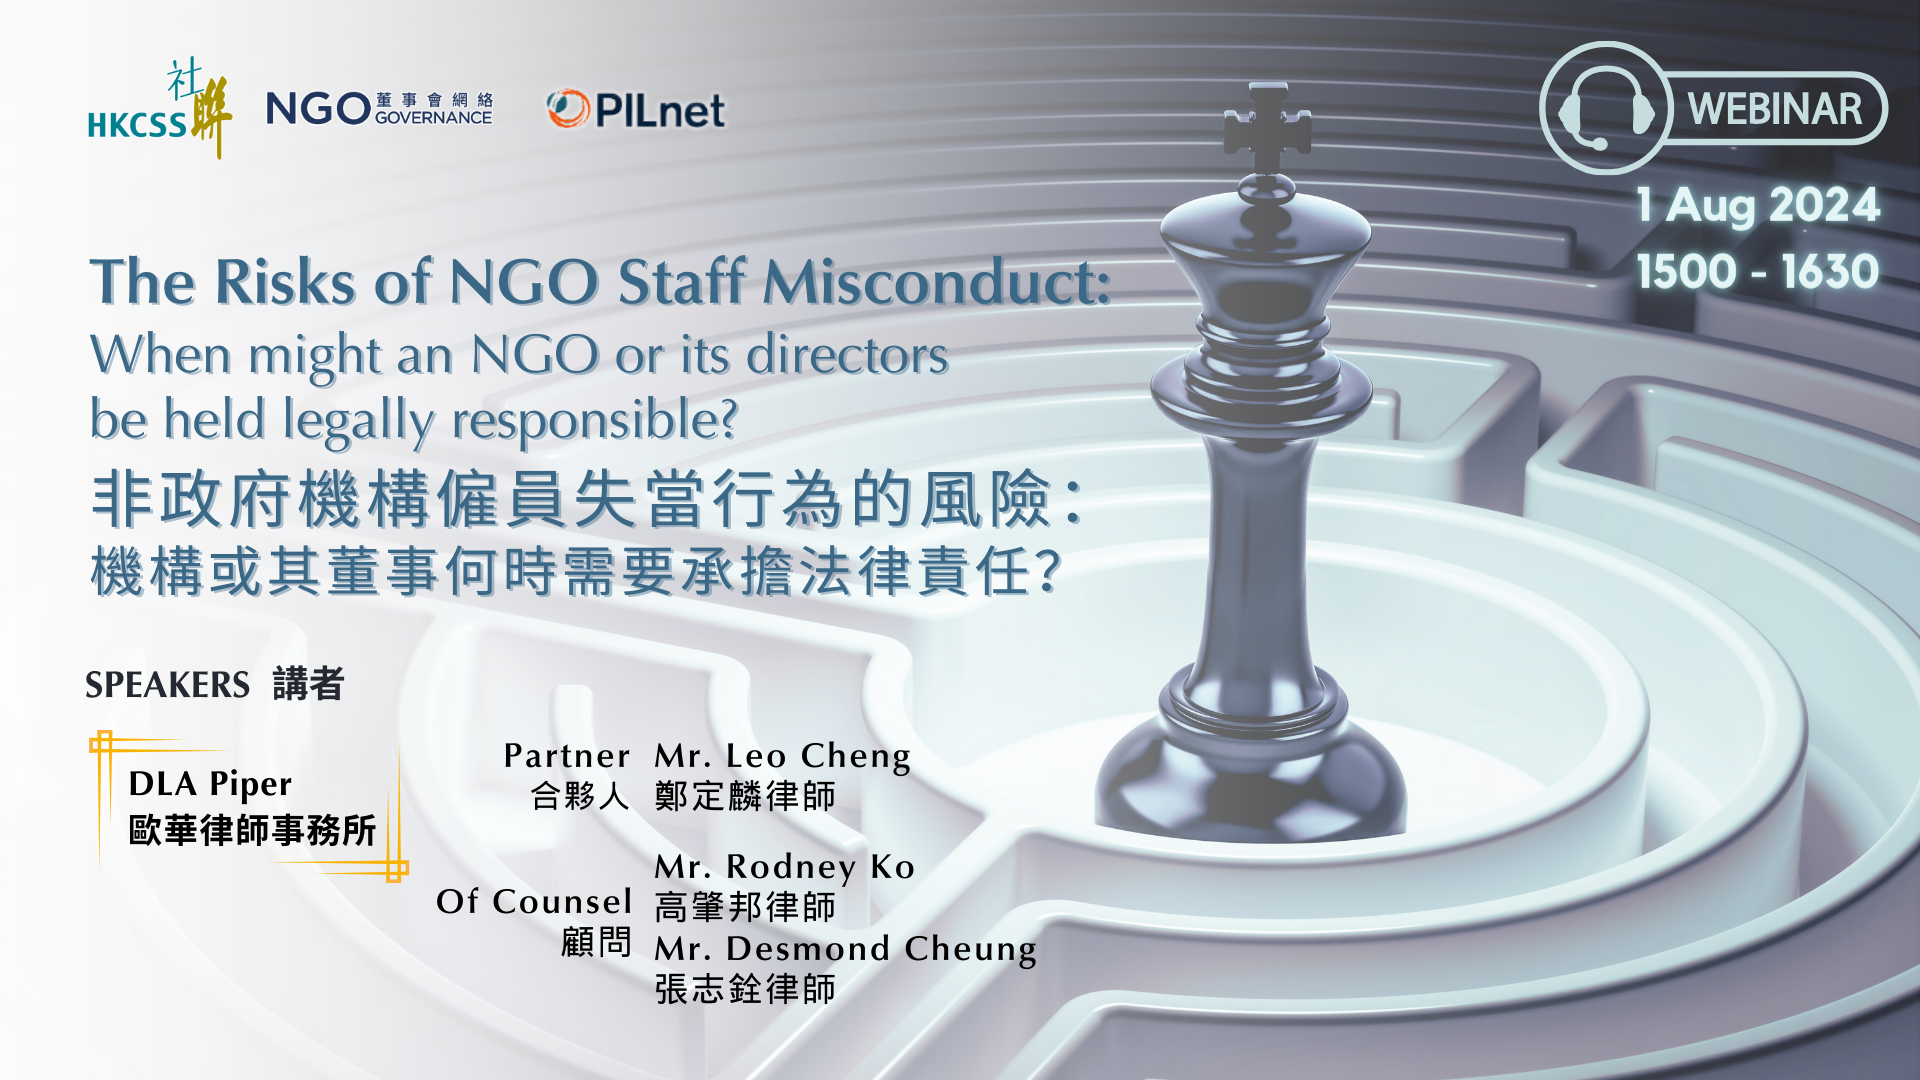 The Risks of NGO Staff Misconduct: When might an NGO or its directors be held legally responsible? 